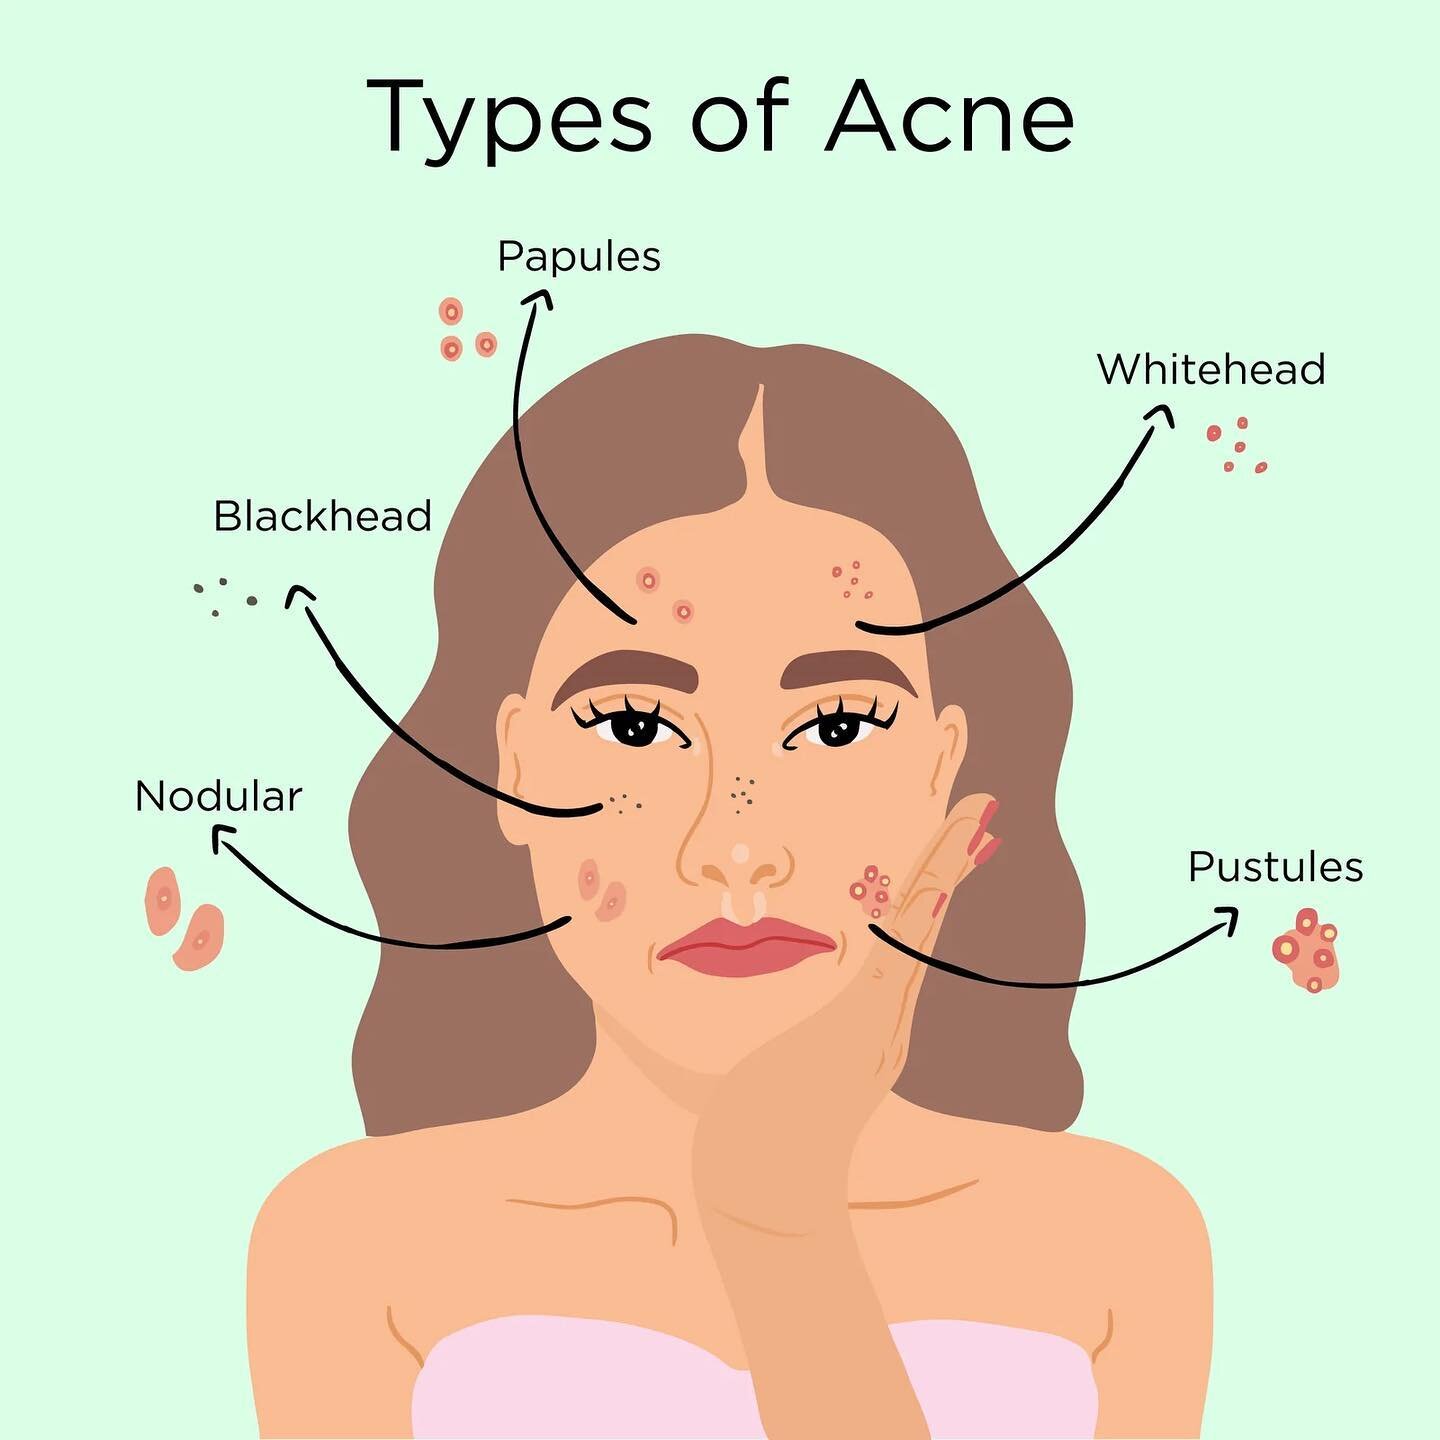 Acne is the skin condition most commonly seen by doctors. It occurs when pores become clogged by dead skin cells resulting in accumulation of sebum, an oily substance produced by oil glands.
Bacteria within pores, called Cutibacterium acnes (C. acnes